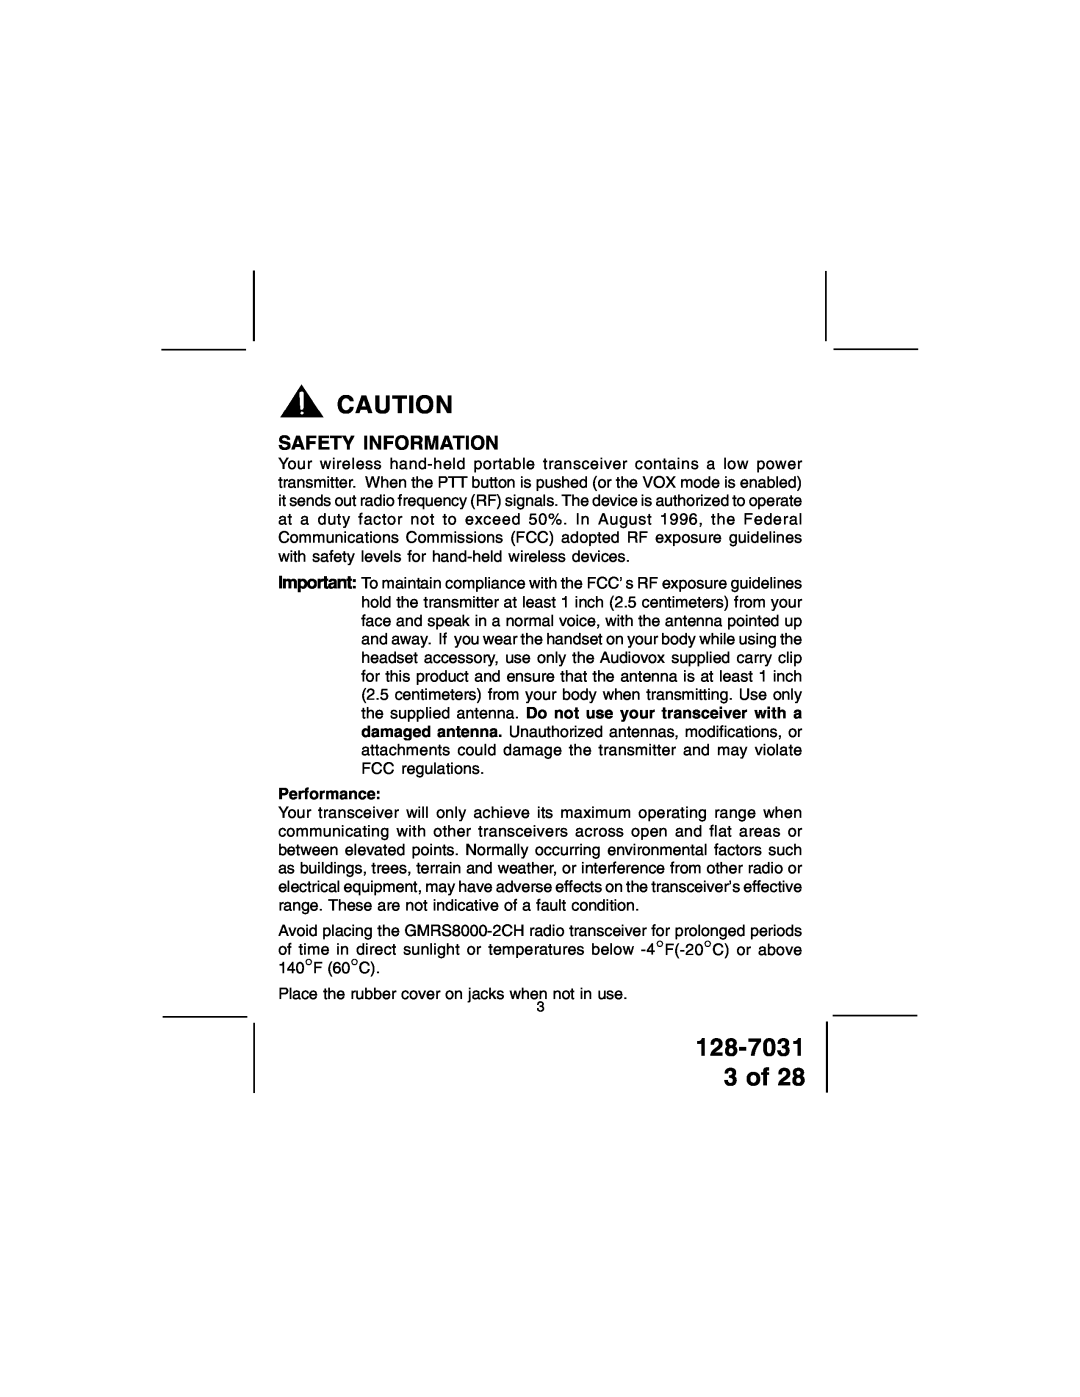 Audiovox owner manual 128-7031 3 of, Safety Information, Performance 